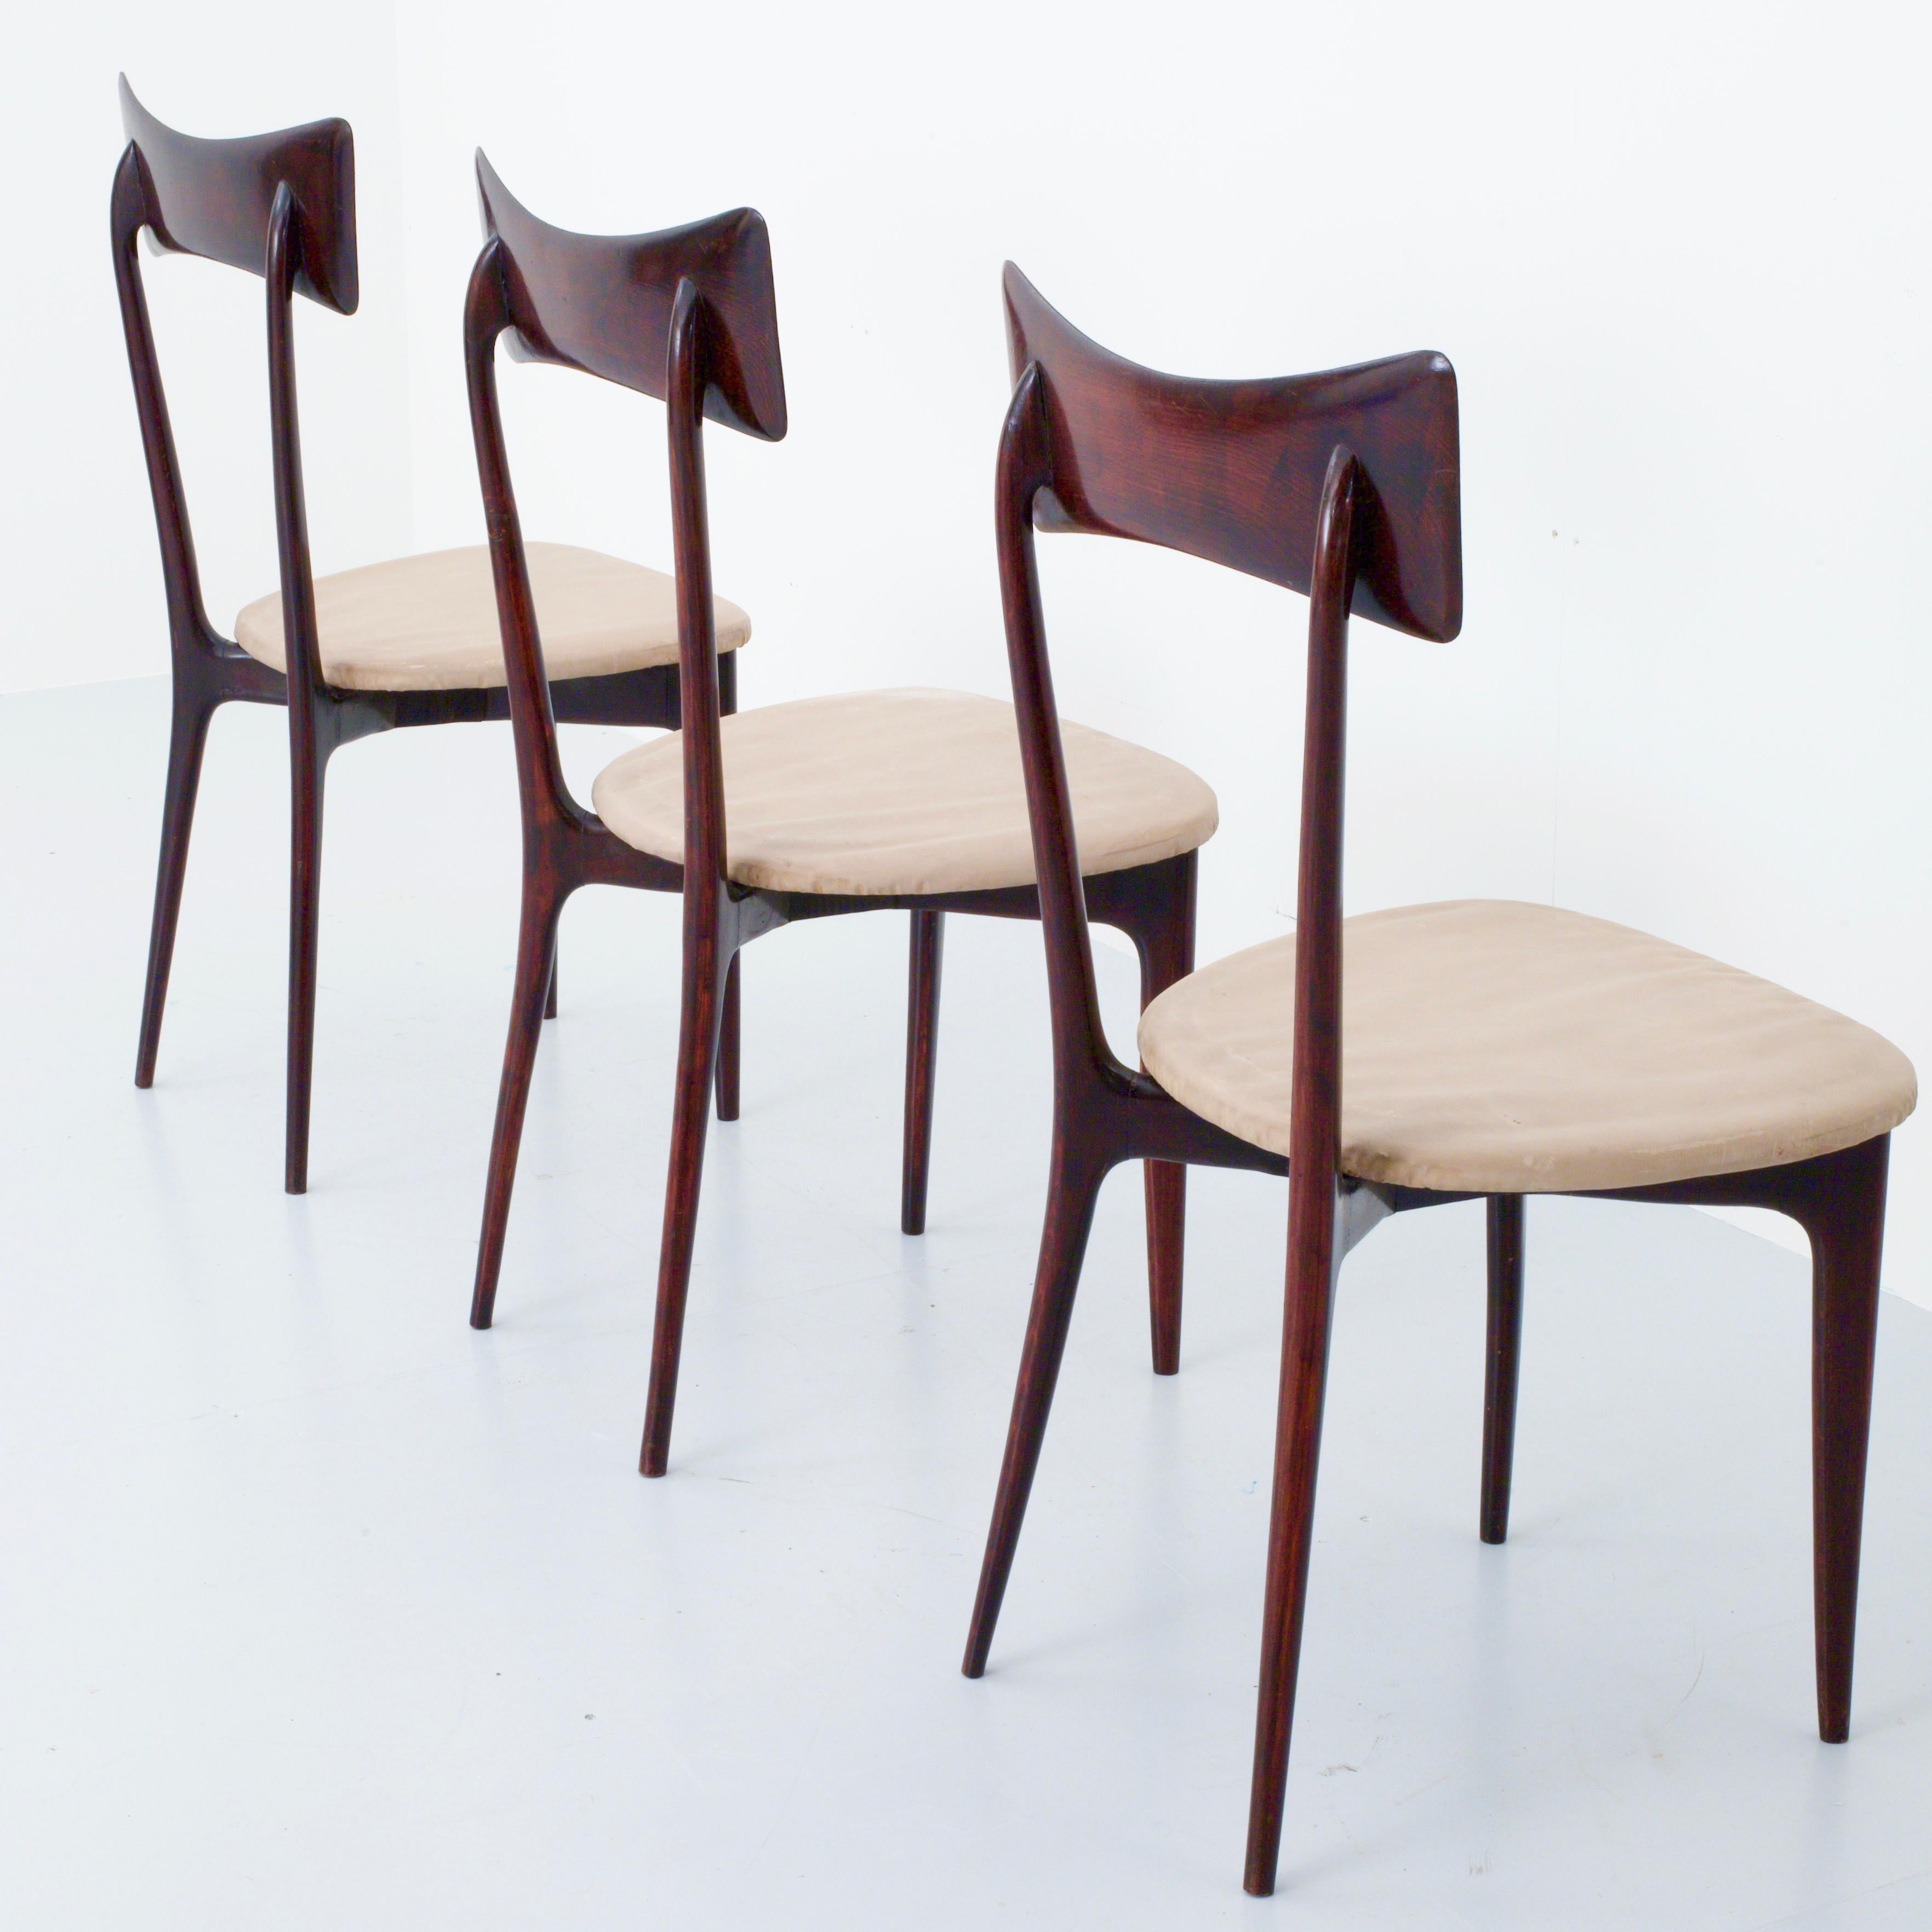 Italian Set of 3 Dining Chairs by Ico & Luisa Parisi for Ariberto Colombo, Italy, 1955